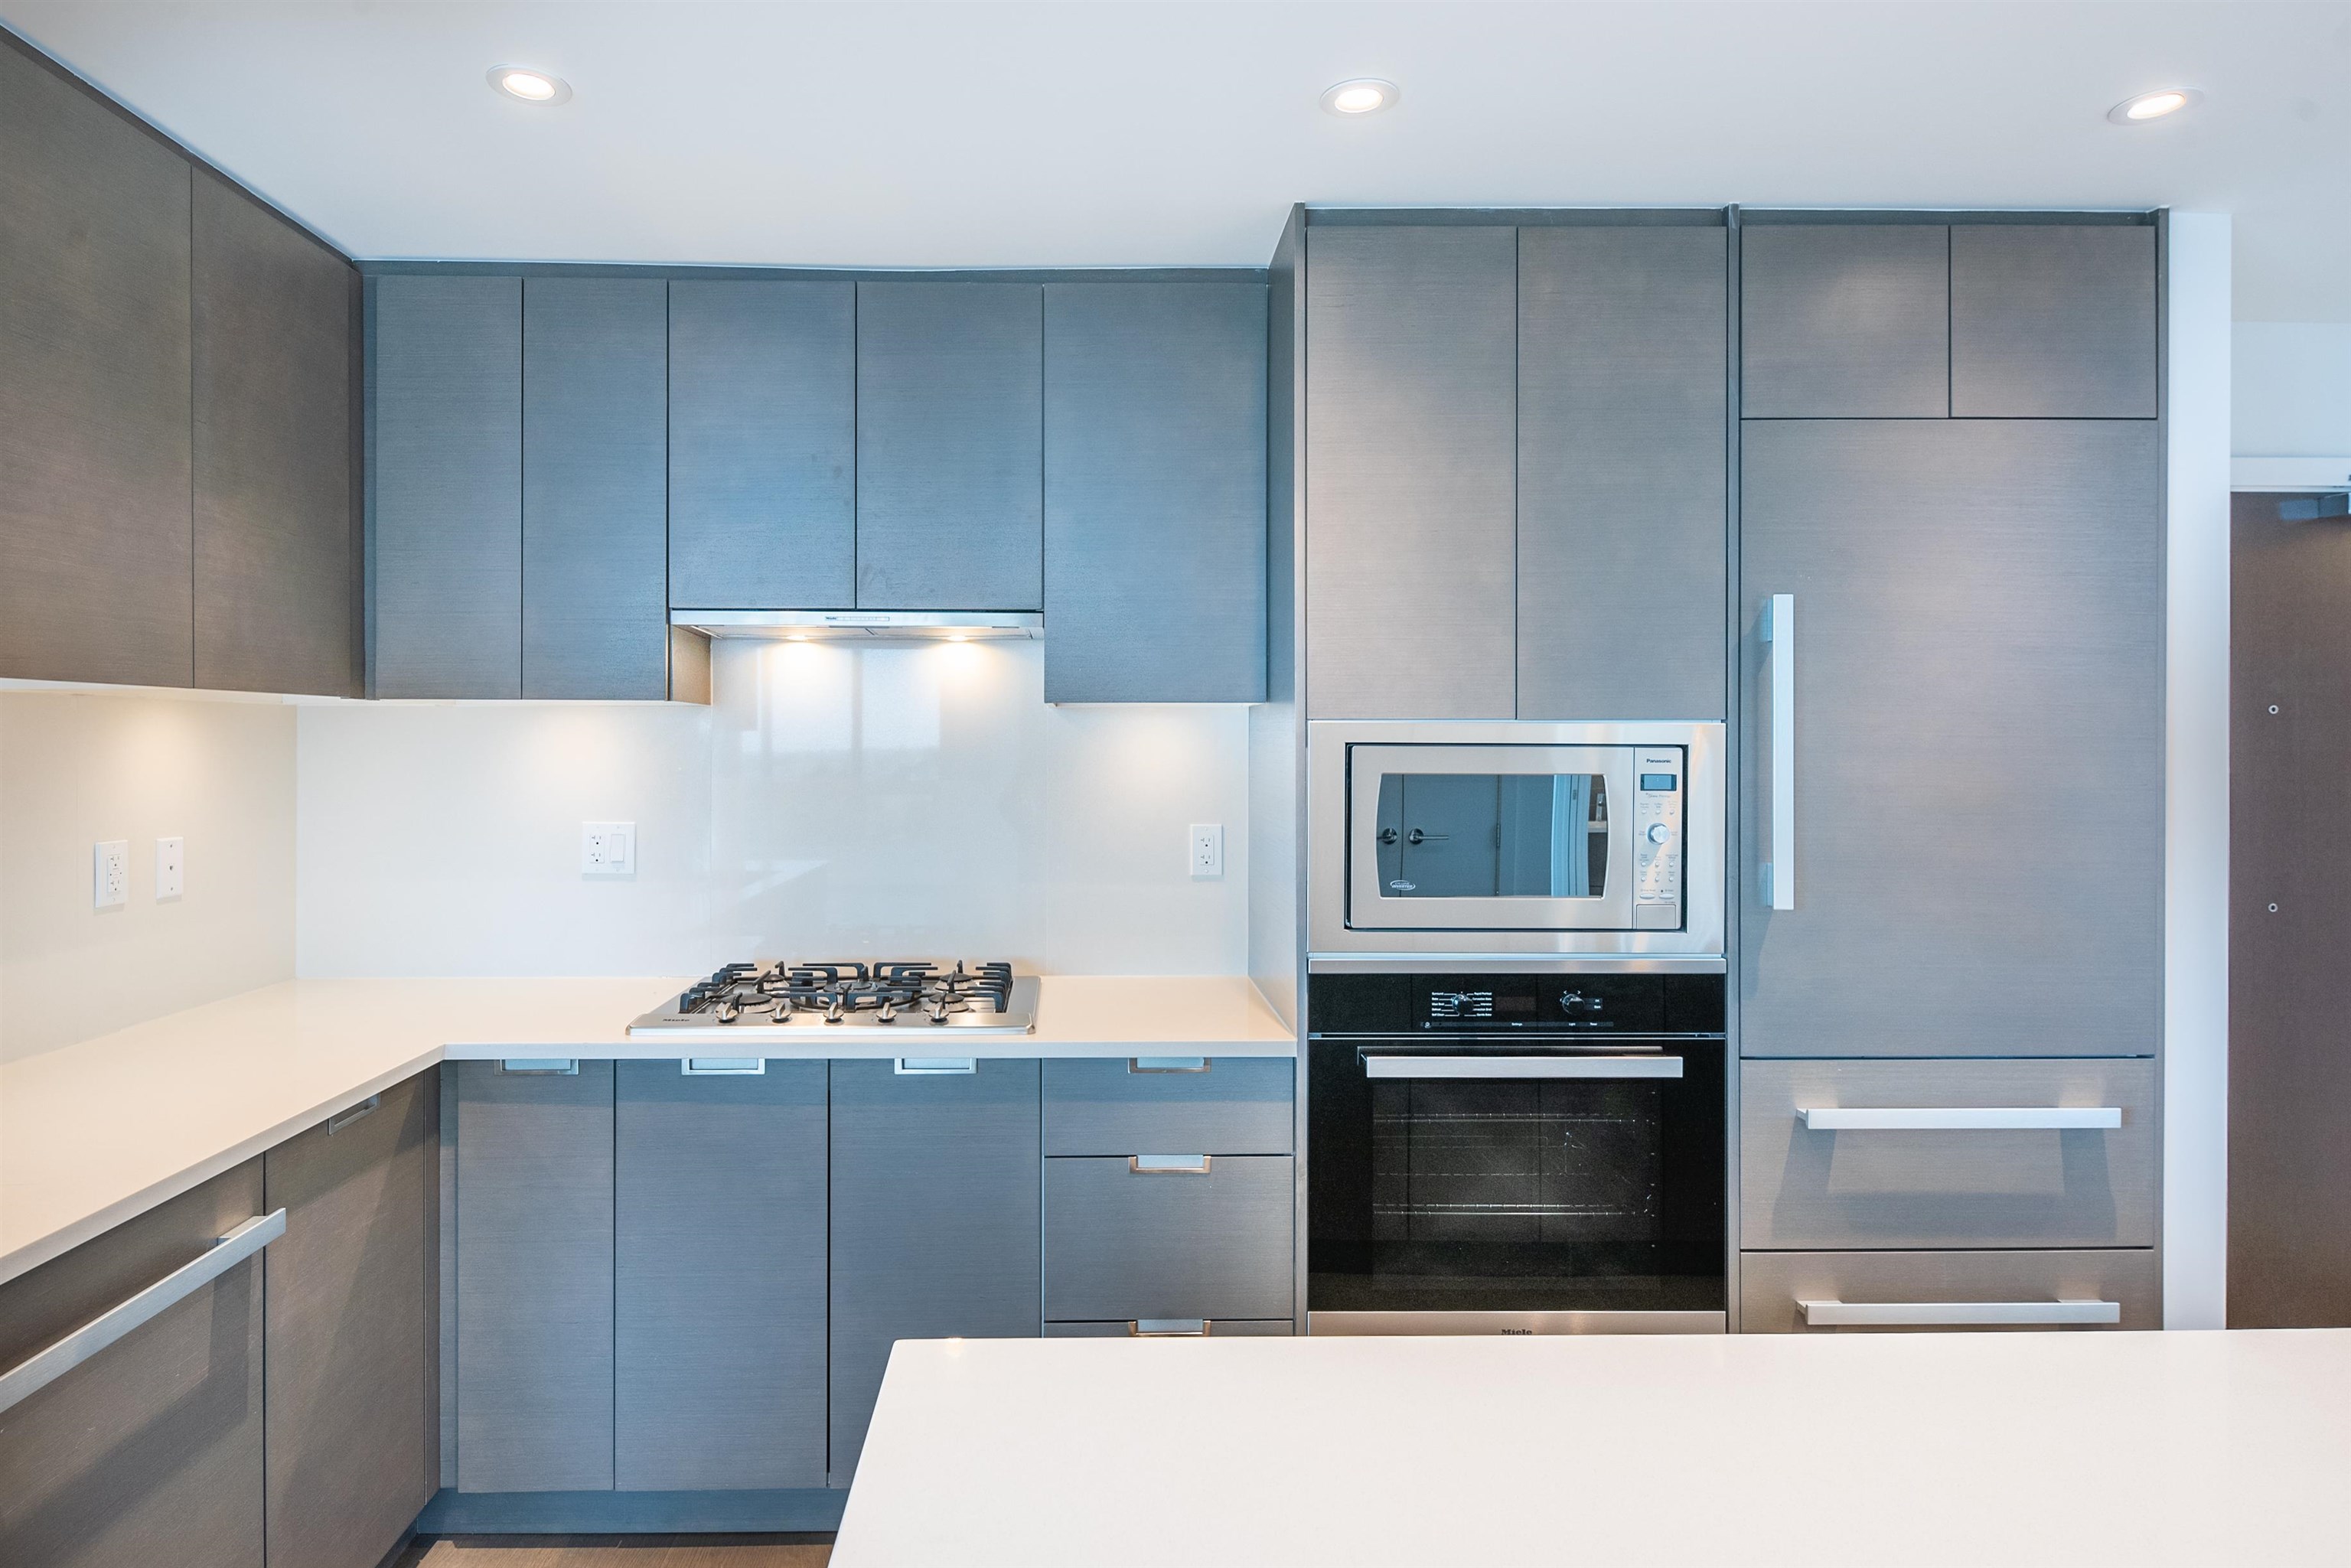 Listing image of 801 6328 CAMBIE STREET